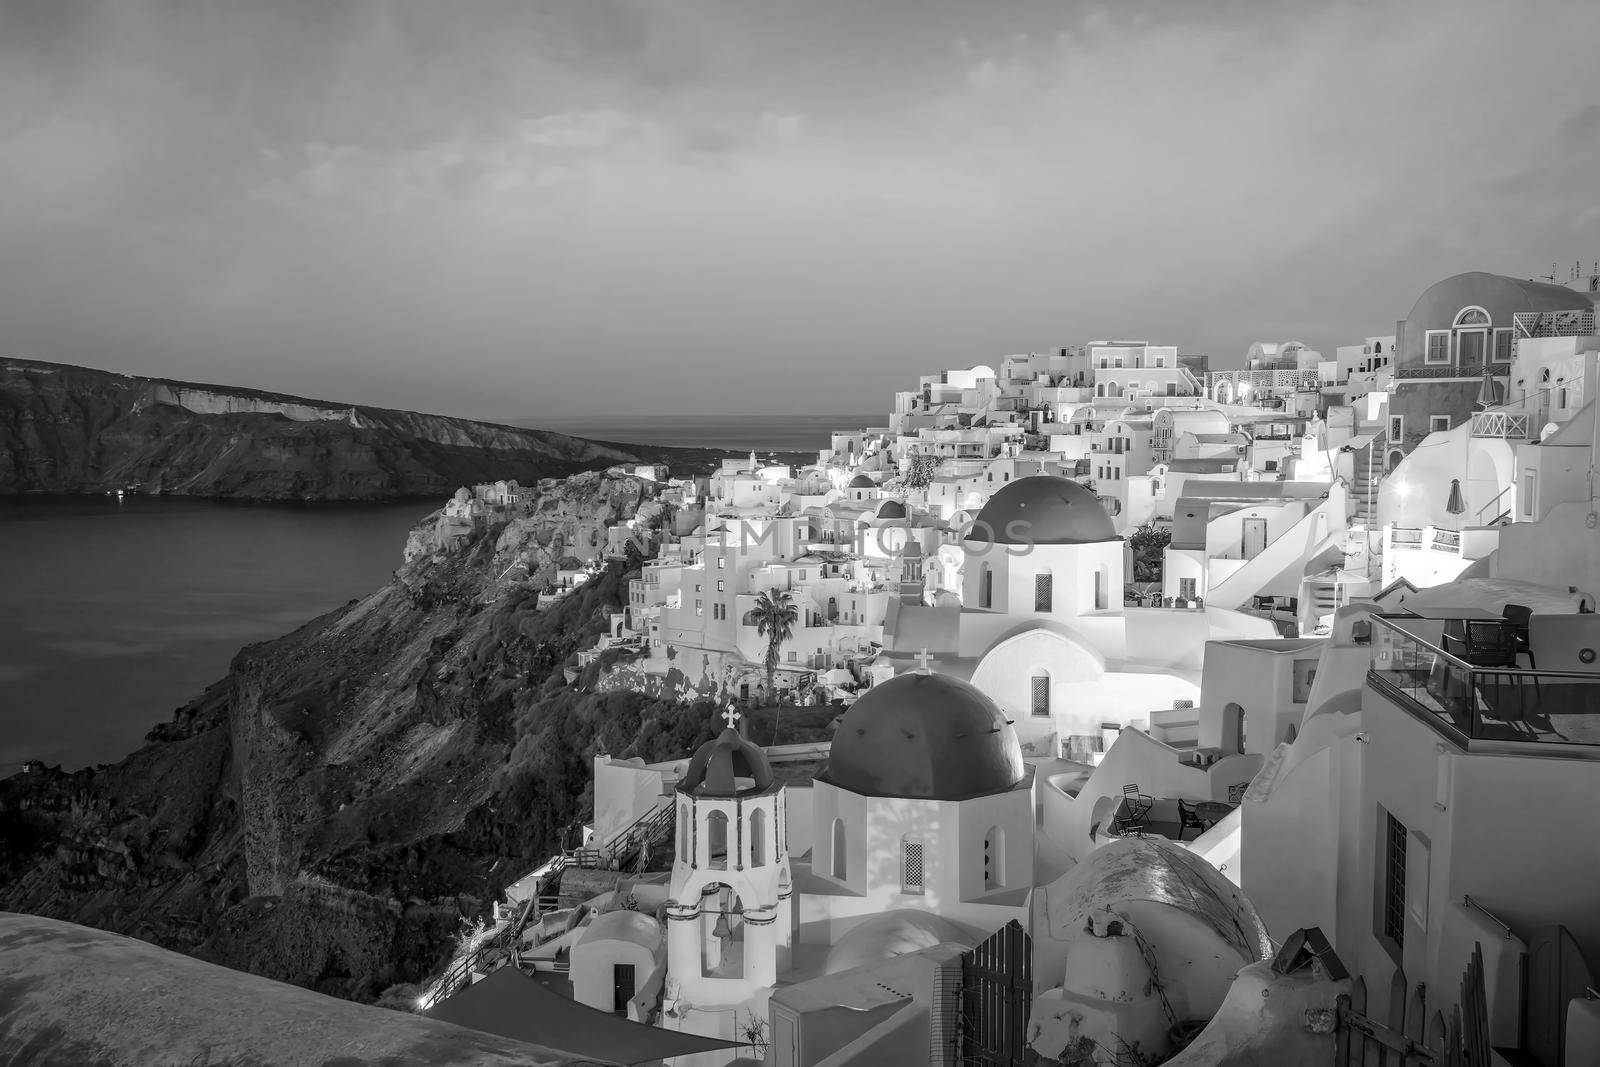 Oia town cityscape at Santorini island in Greece by f11photo